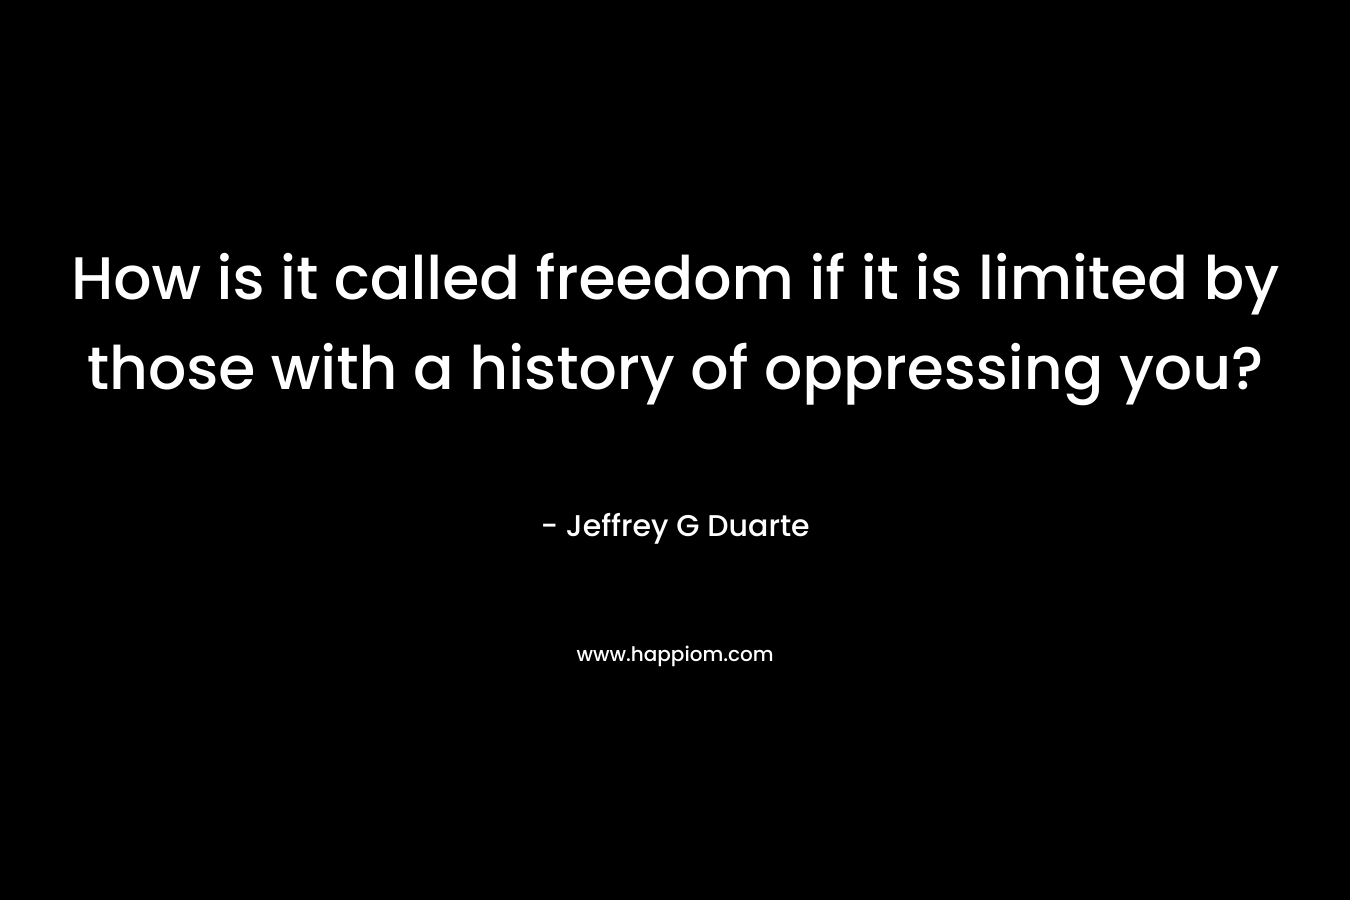 How is it called freedom if it is limited by those with a history of oppressing you? – Jeffrey G Duarte